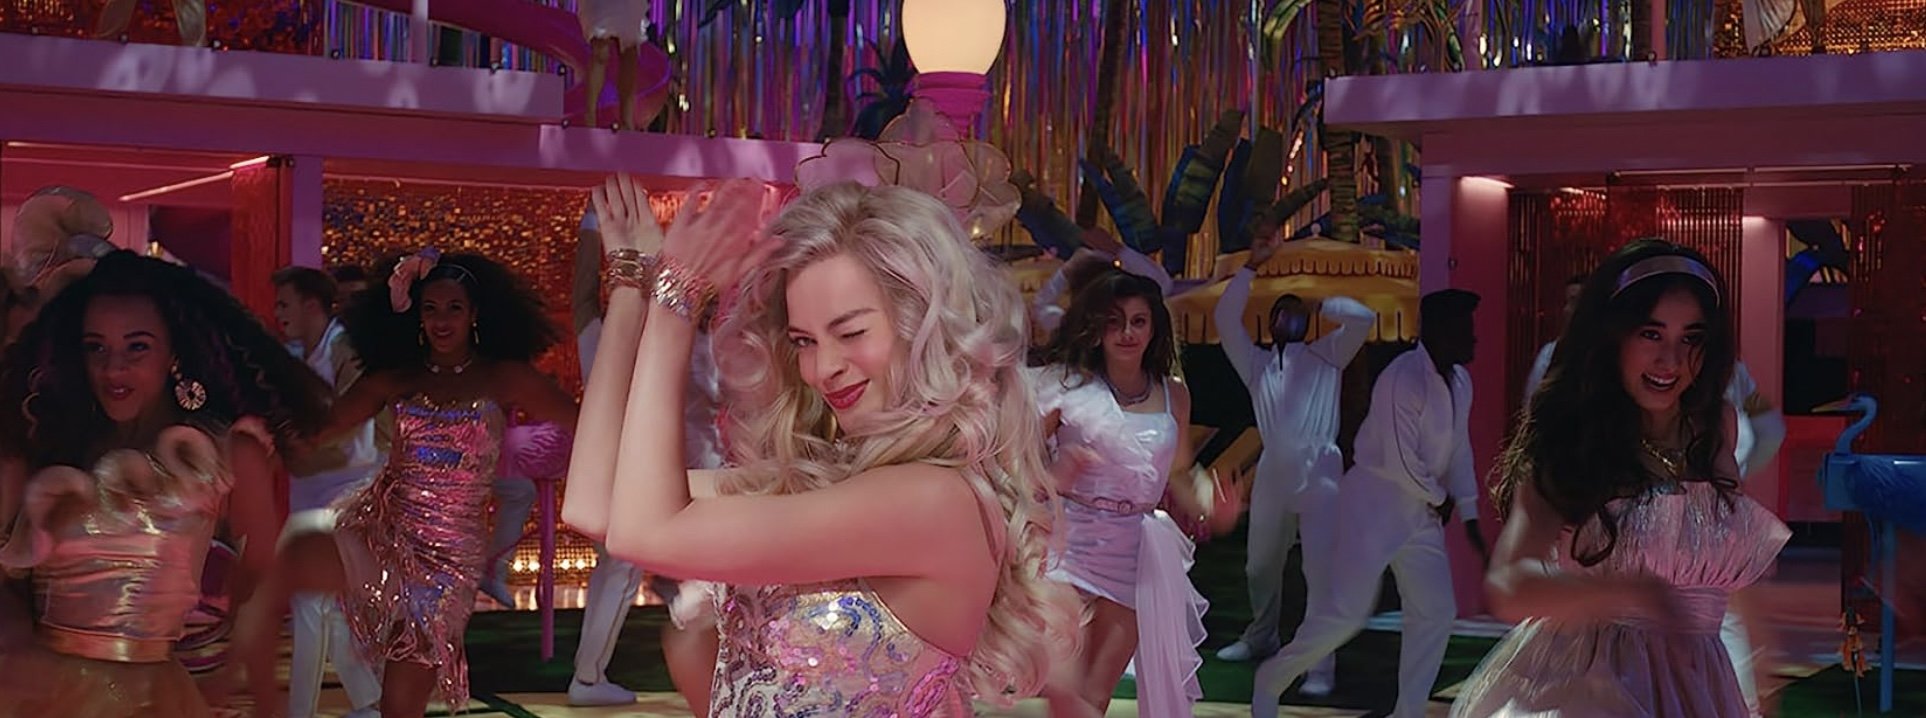 Barbie-hosts-a-dance-party-at-her-Dreamhouse-in-the-Barbie-movie-2023.jpg